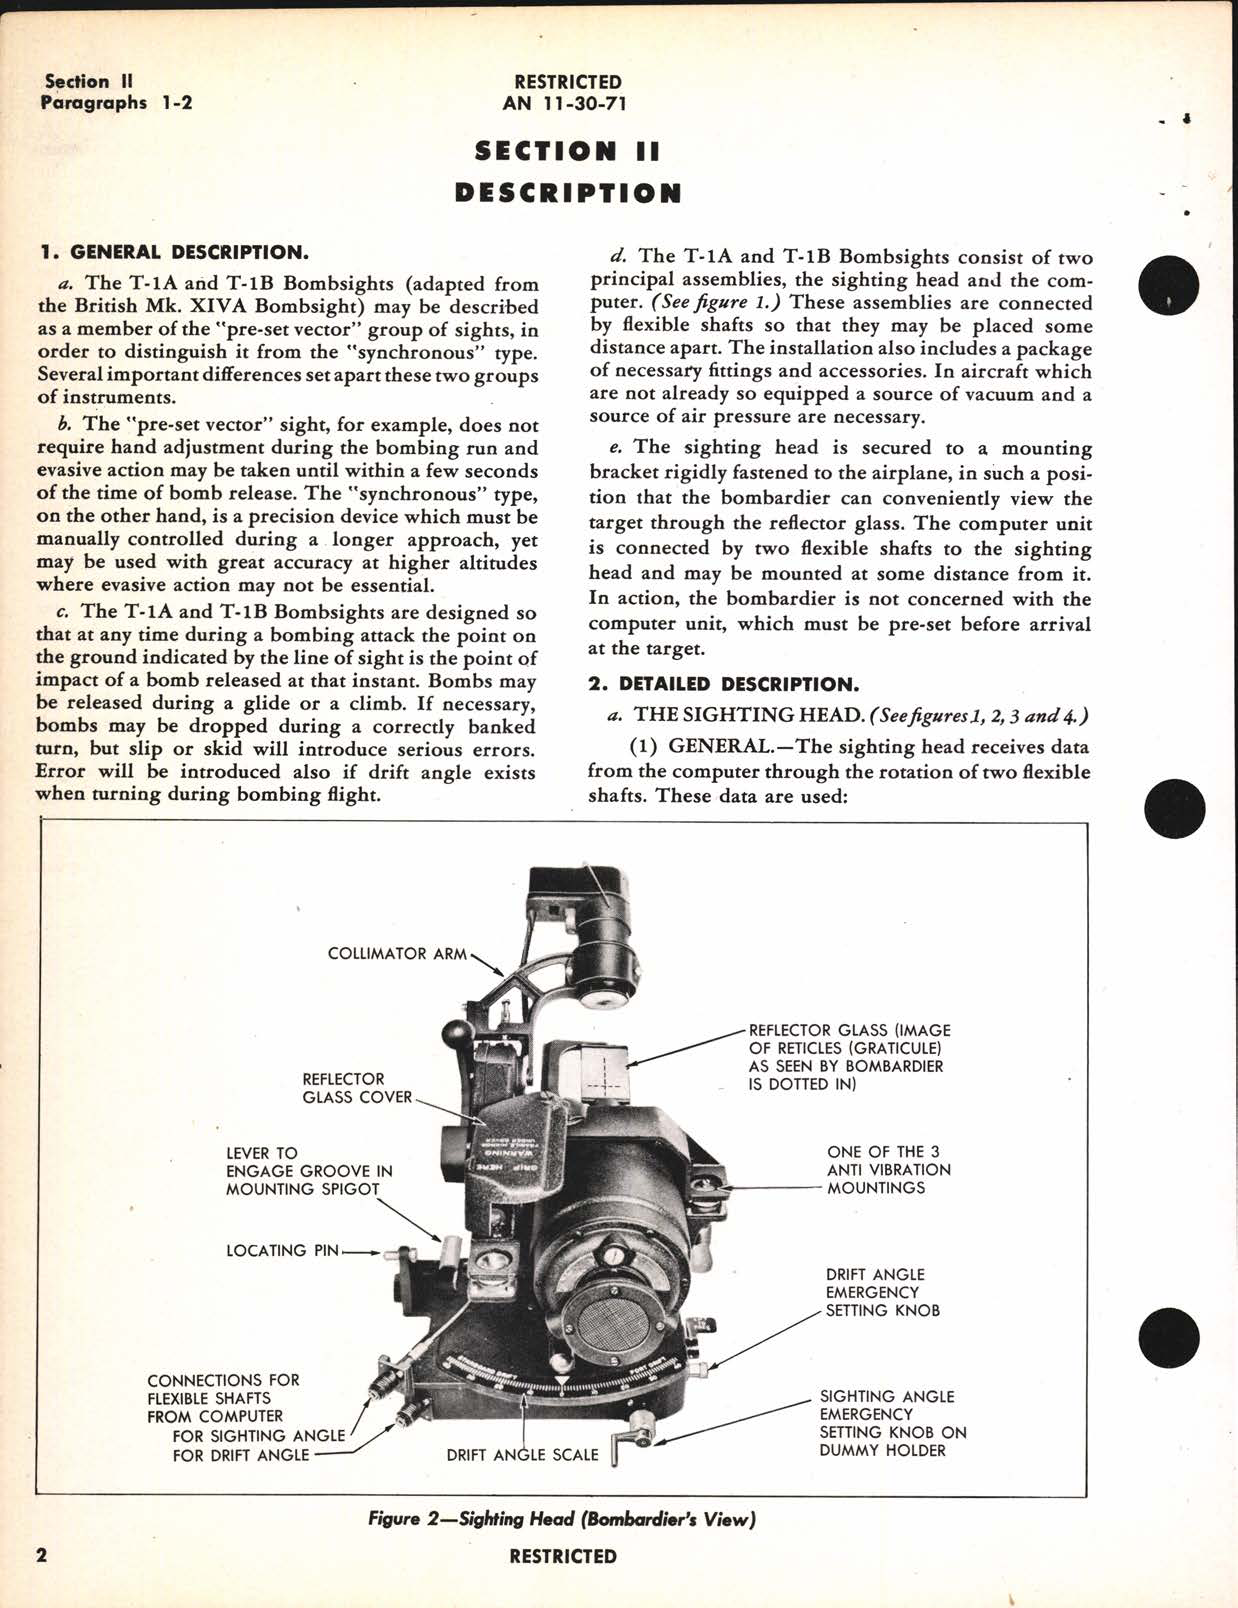 Sample page 6 from AirCorps Library document: Handbook of Instructions with Parts Catalog for Bombsights Types T-1A and T-1B